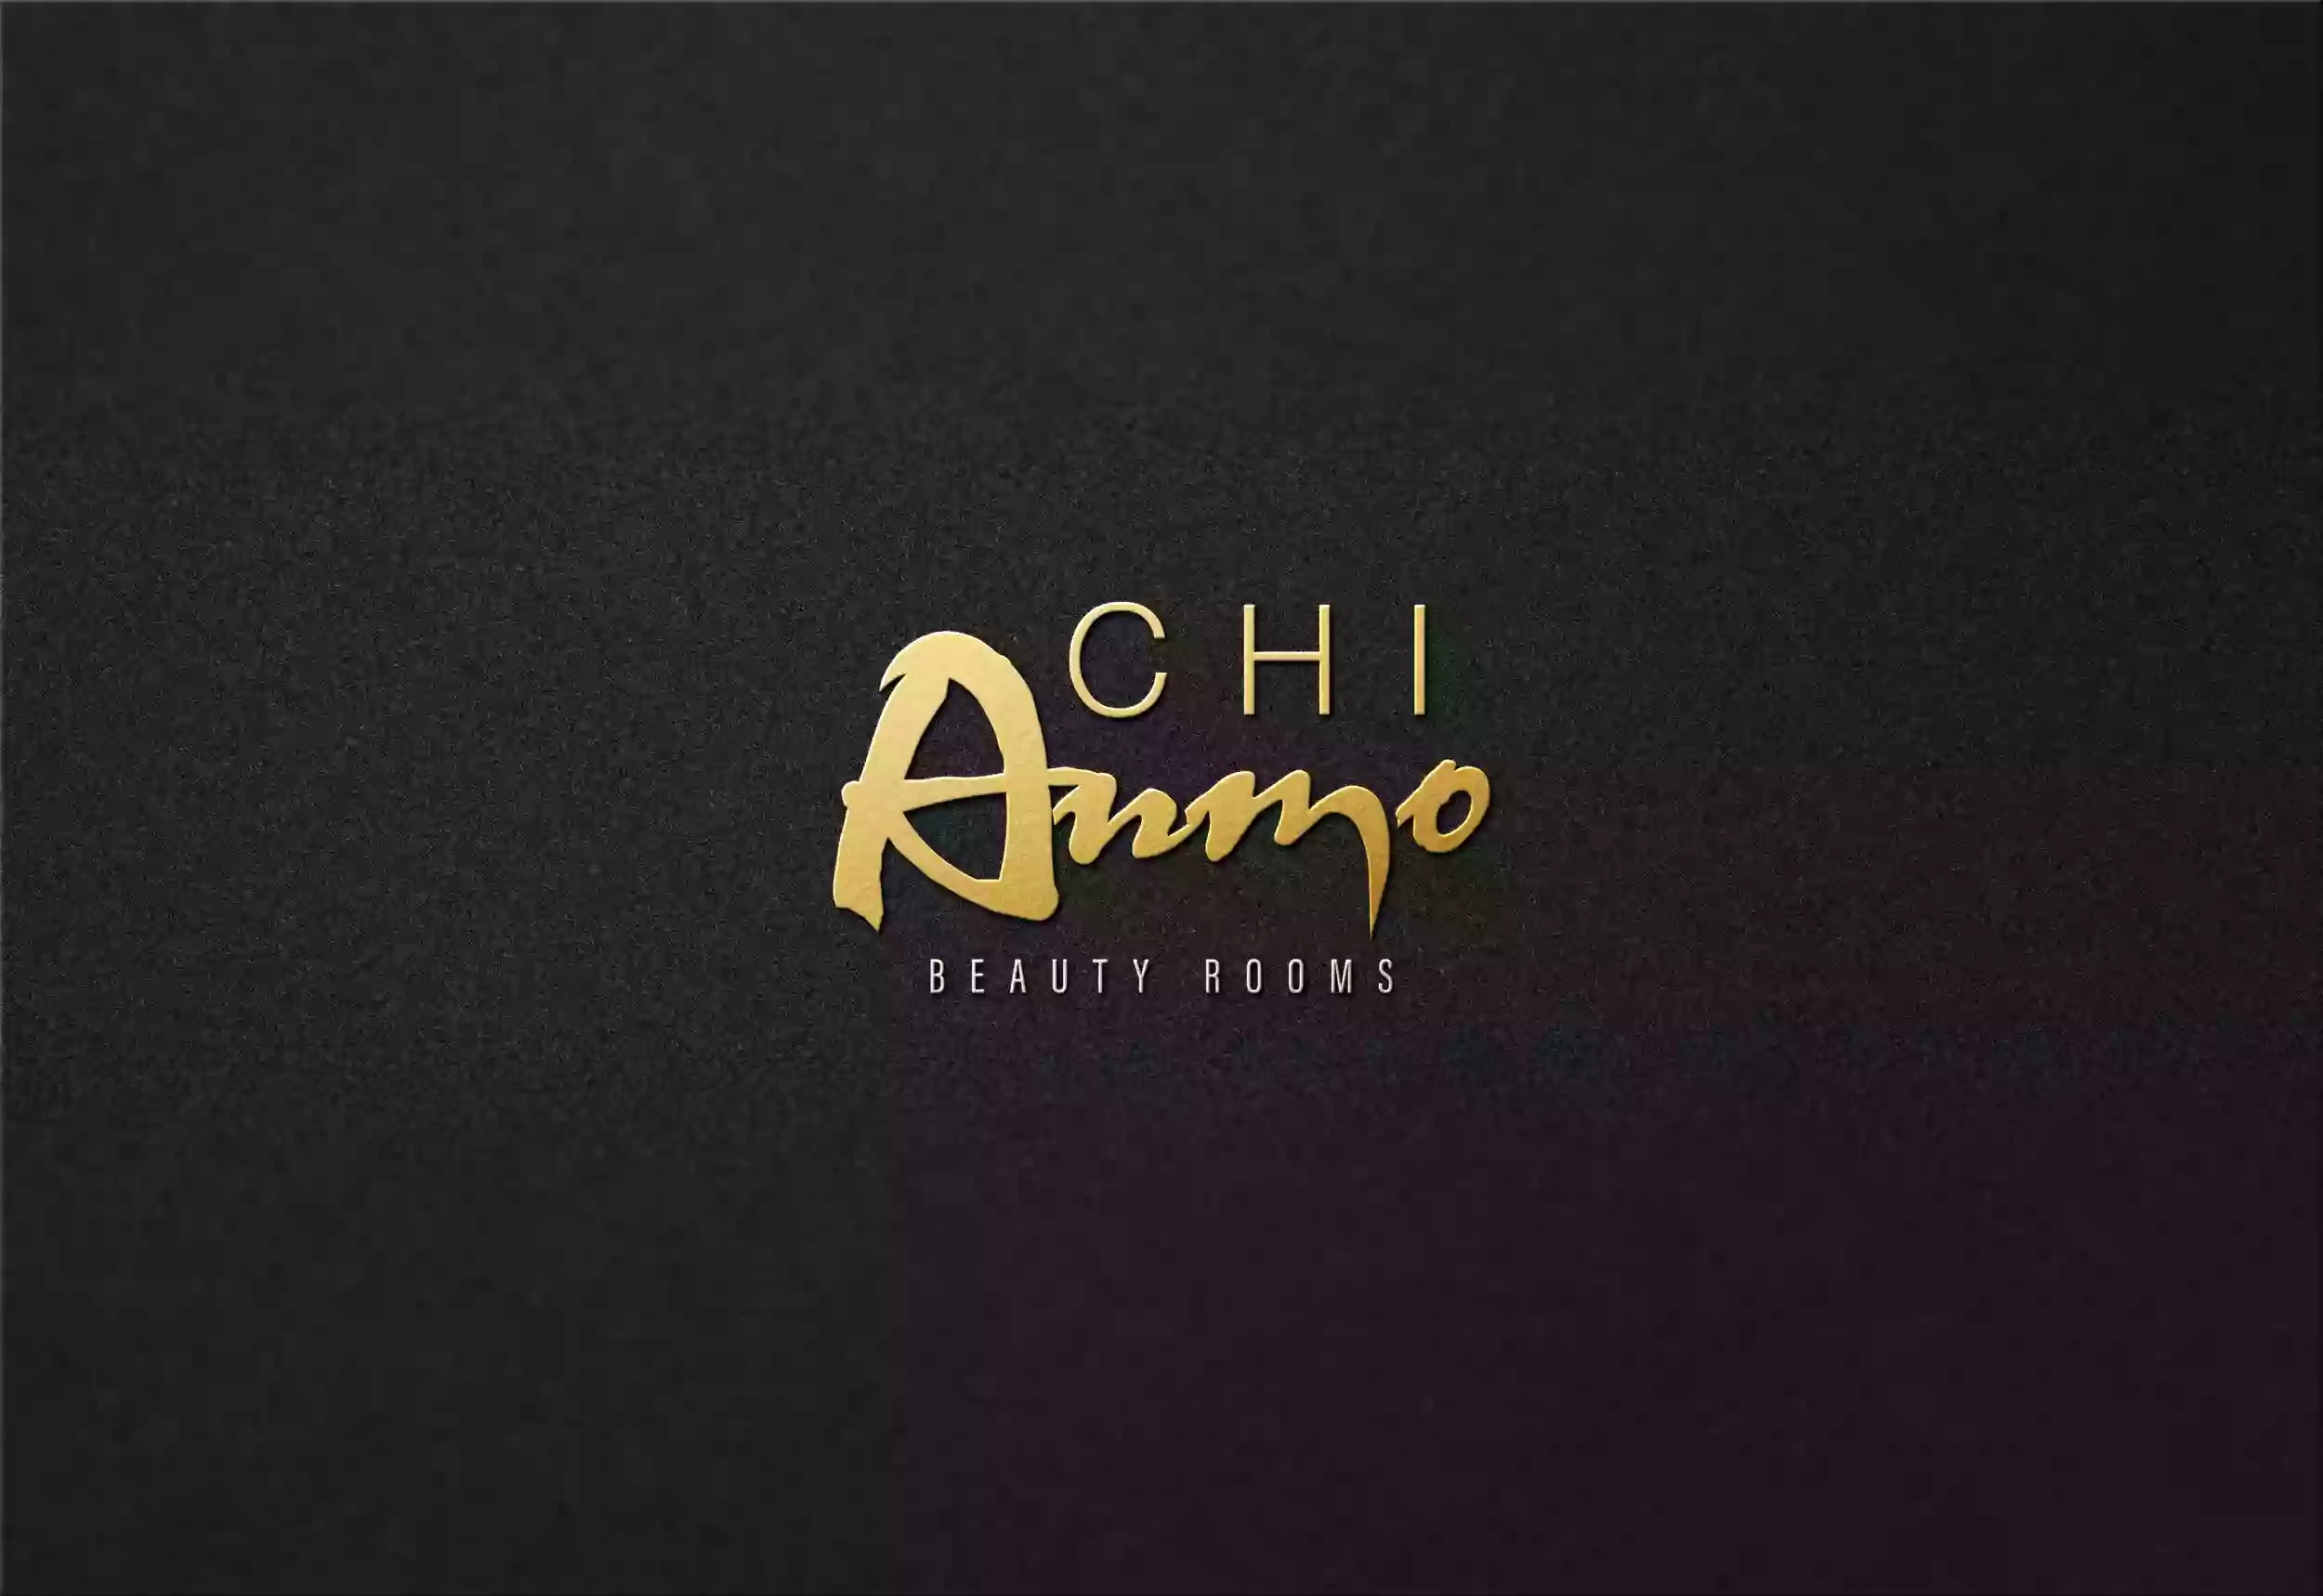 Chi Anmo Beauty Rooms